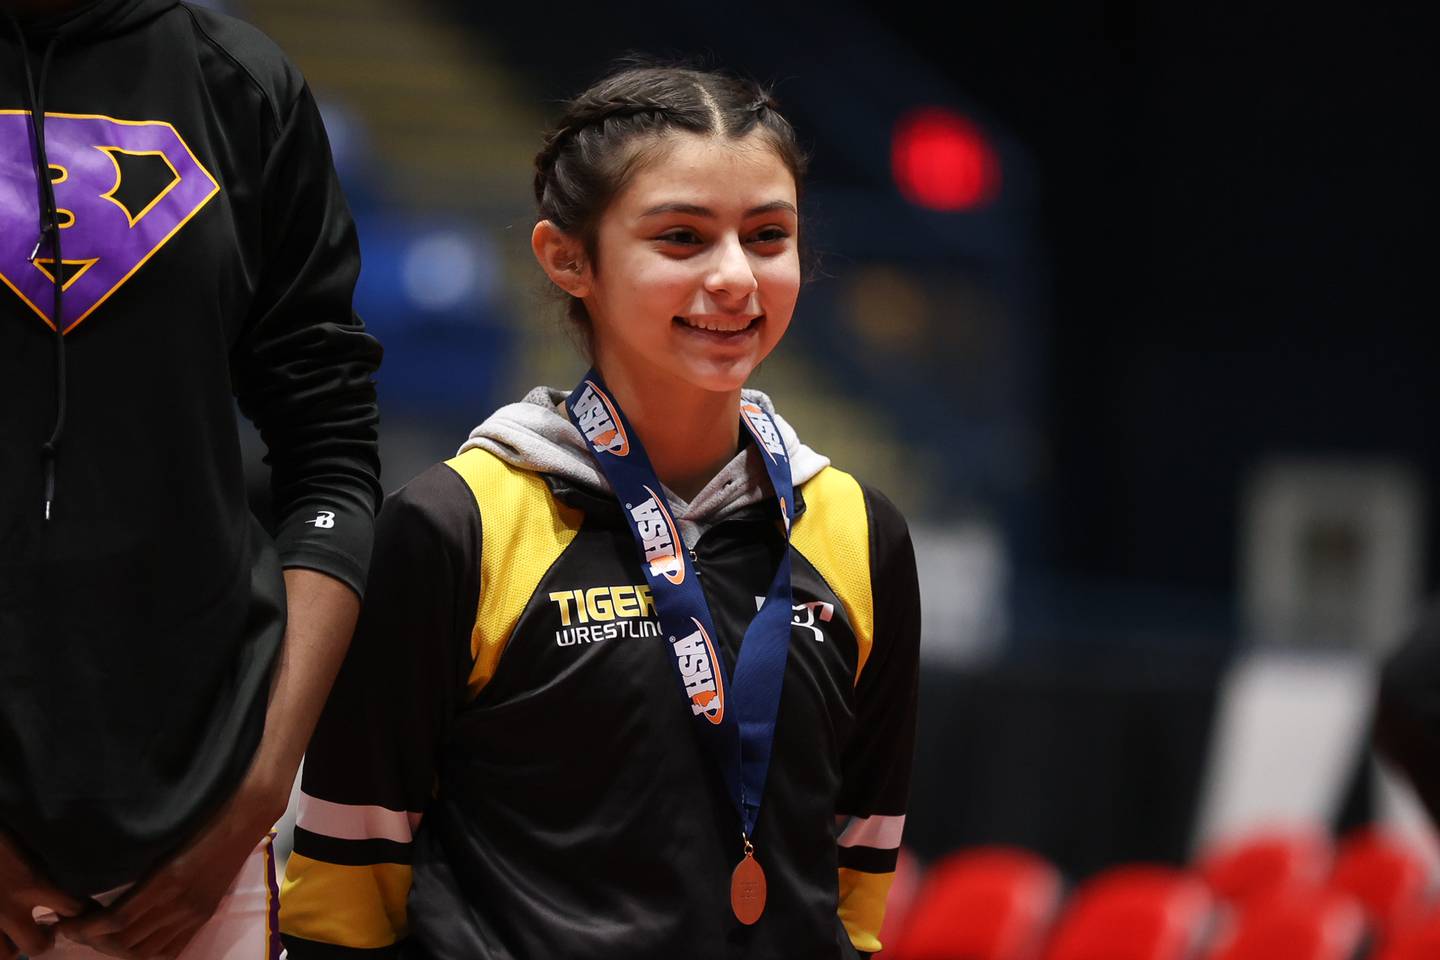 Joliet West’s Eliana Paramo took 5th place in the 115 pound championship match at Grossinger Motor Arena in Bloomington. Saturday, Feb. 26, 2022, in Champaign.